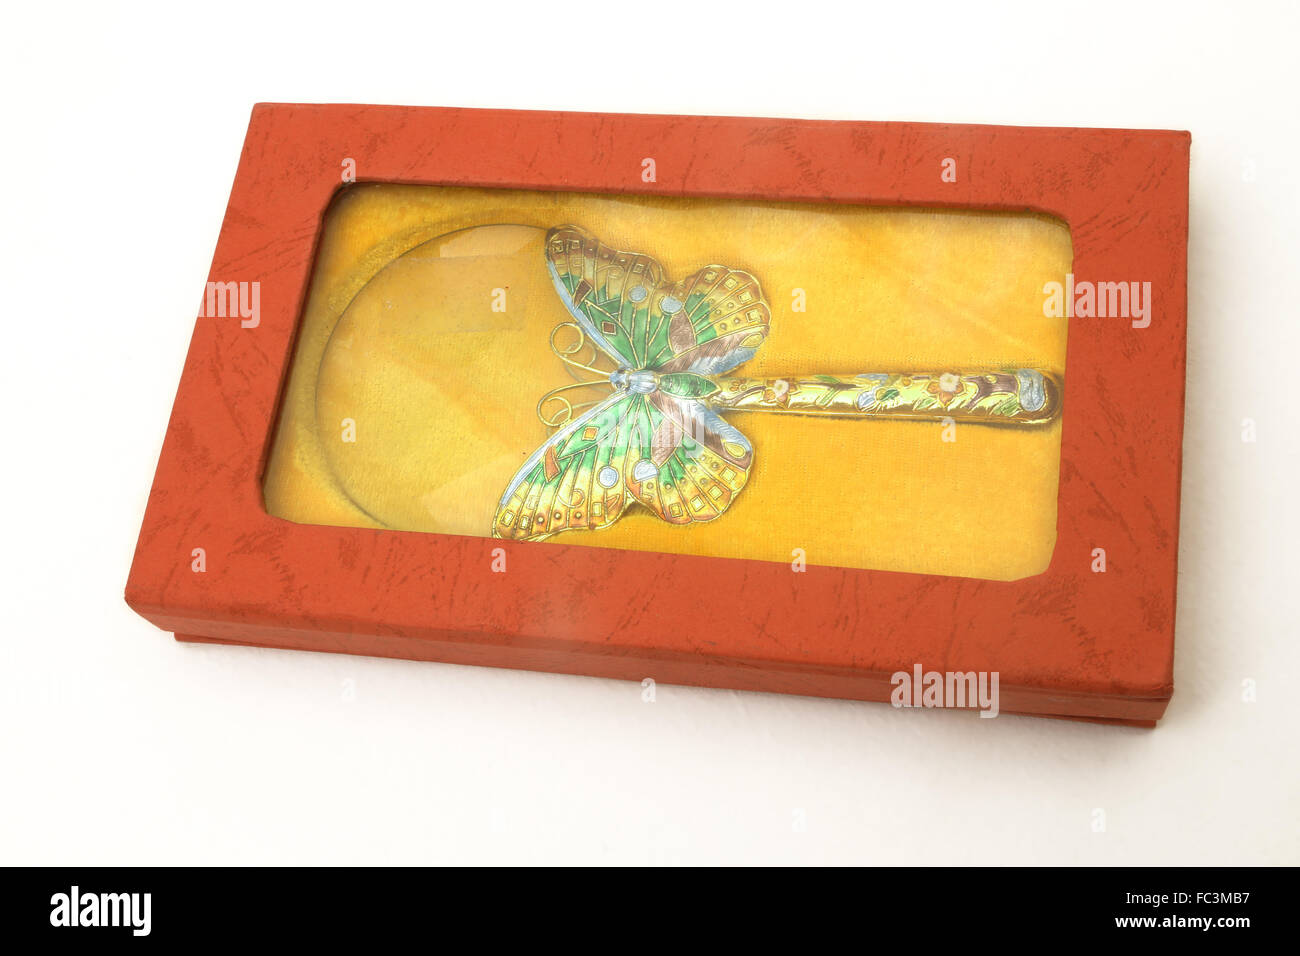 Magnifying Glass With Cloisonne Enamel Butterfly Design Stock Photo